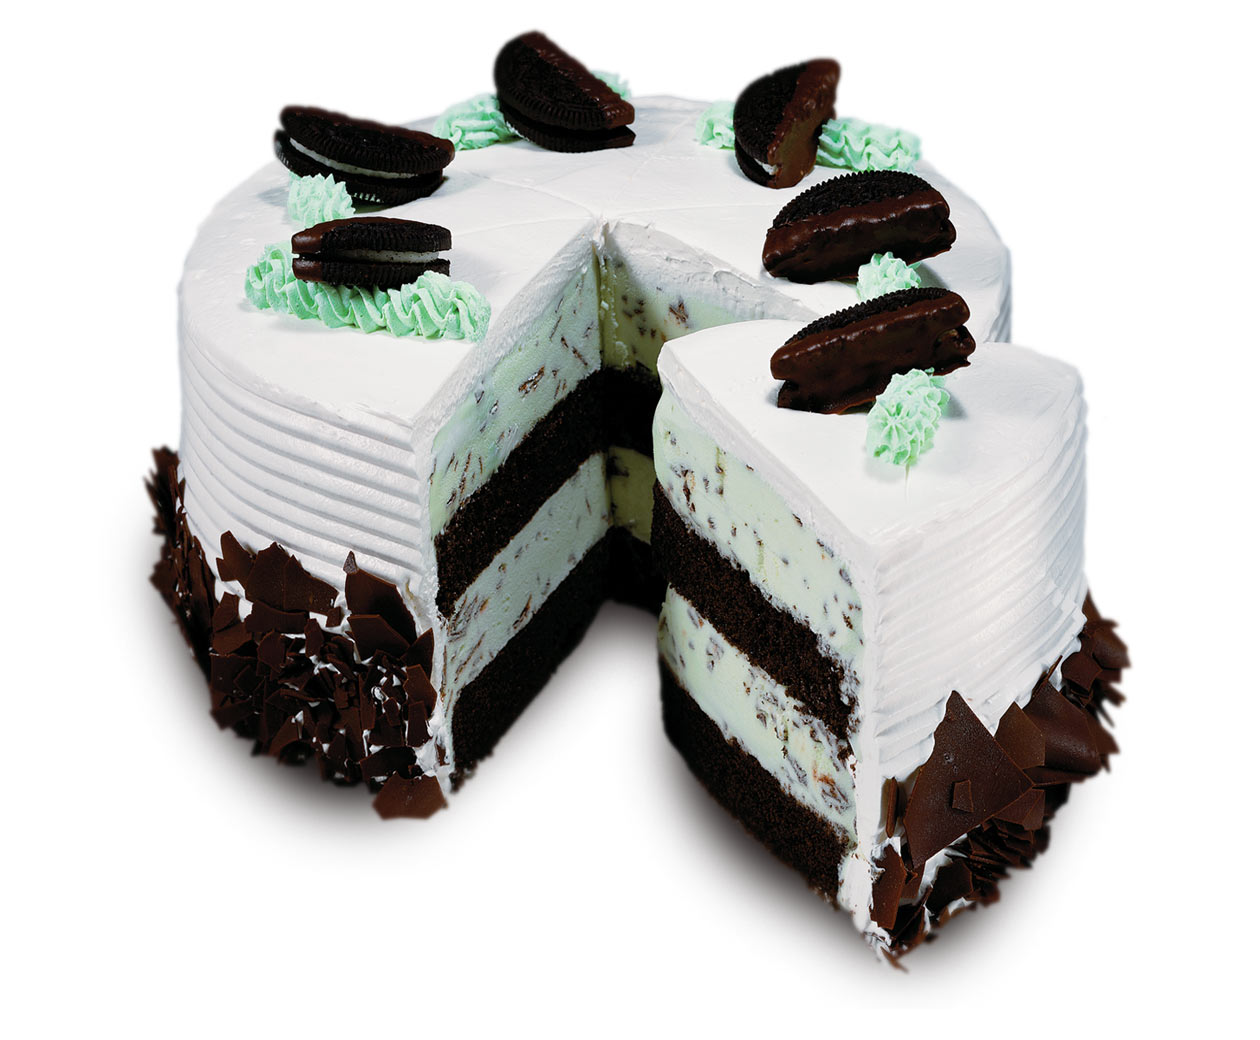 Mint Chip Cold Stone Creamery Signature Cakes